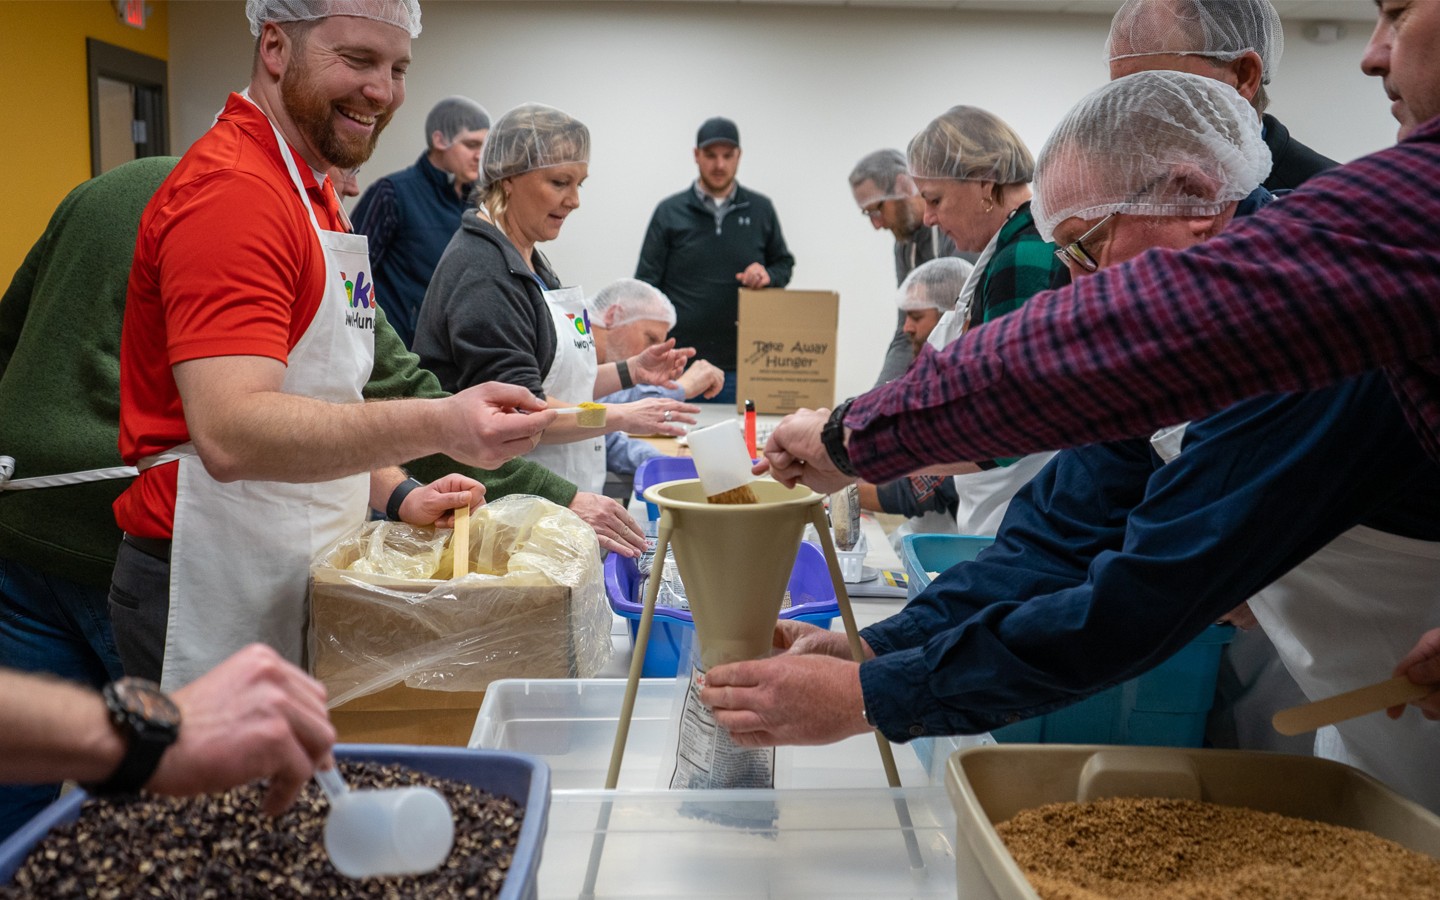  Wendling partnered with the charity “Take Away Hunger” to host a team building event at our DeWitt, IA office.